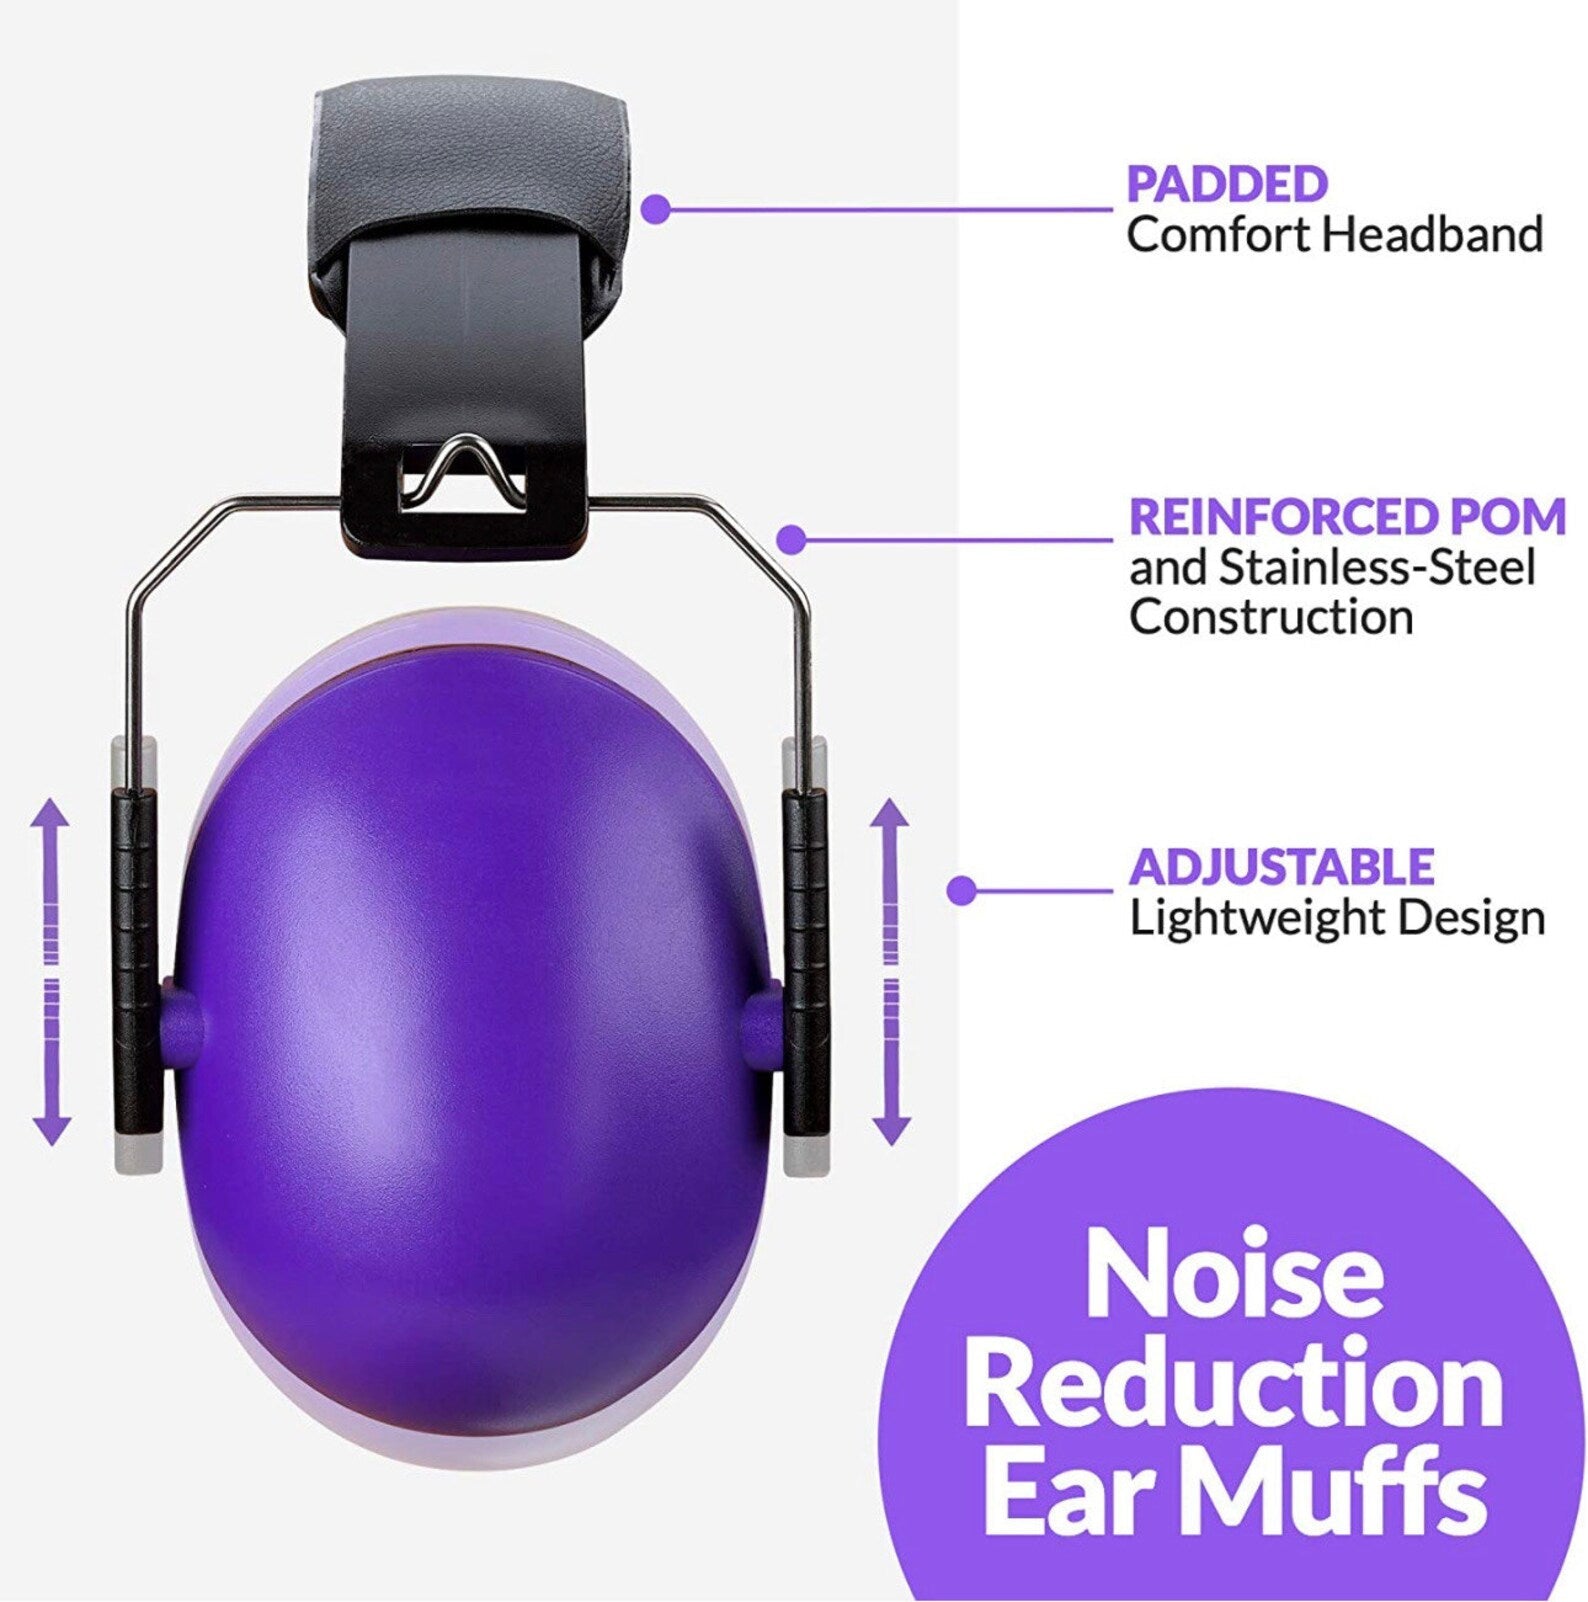 Crystalized Hearing Protection and Noise Reduction Earmuffs Lightweight, Adjustable and Foldable NRR 20dB Purple CLOTHING, SHOES & ACCESSORIES by BlingxAddict | BlingxAddict